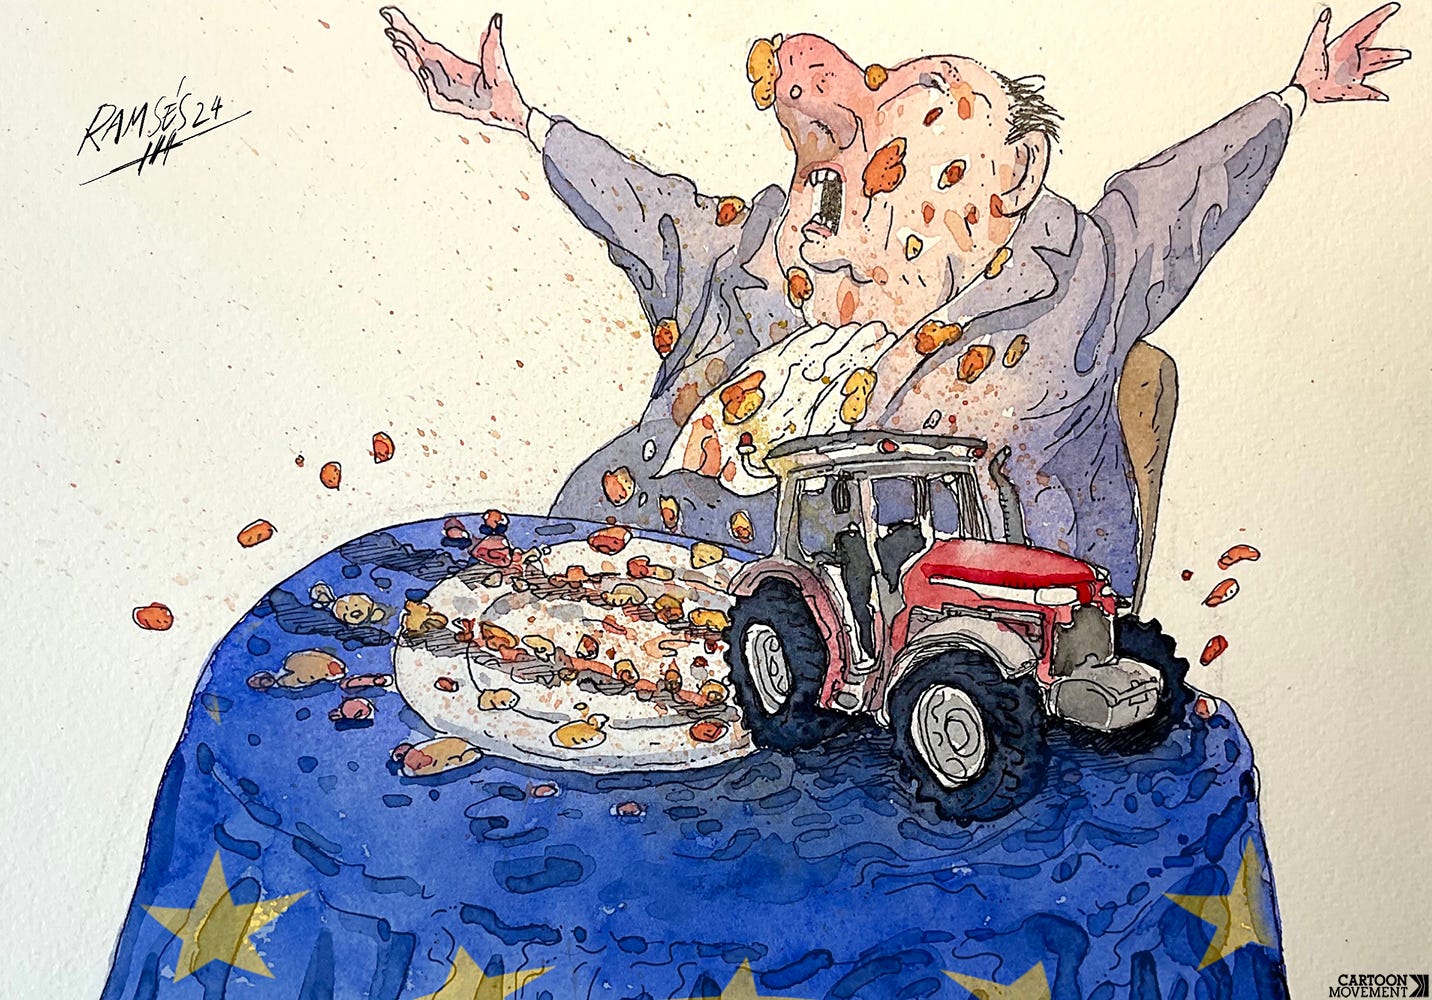 A man sits air a table with a tablecloth that has the EU flag on it, staring in consternation down at his plate with his arms in the air. A small tractor is driving across his plate, ruining his meal.